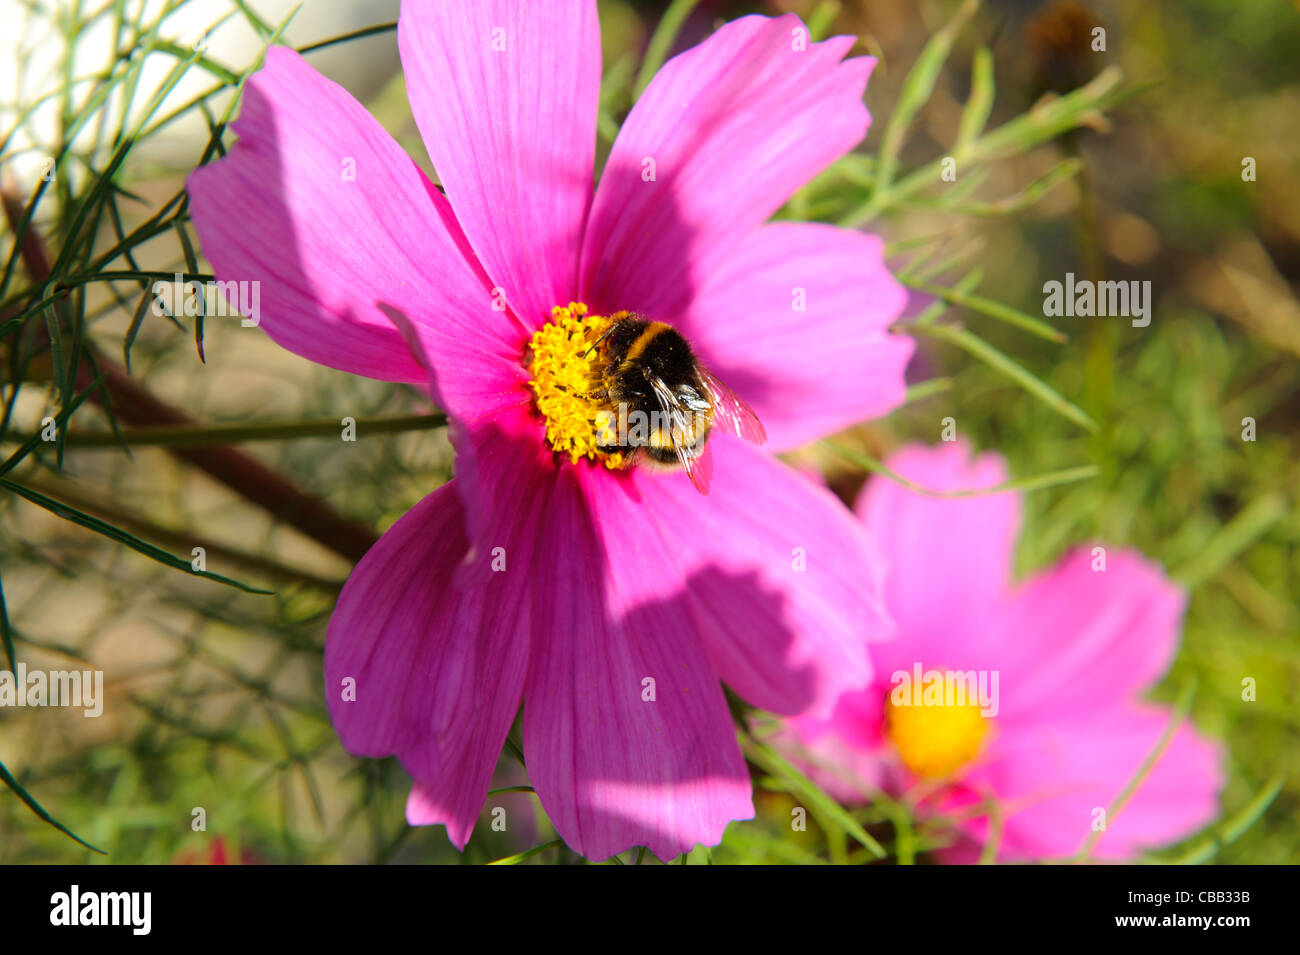 Stock photo of a bee feeding on pink cosmos flowers Stock Photo